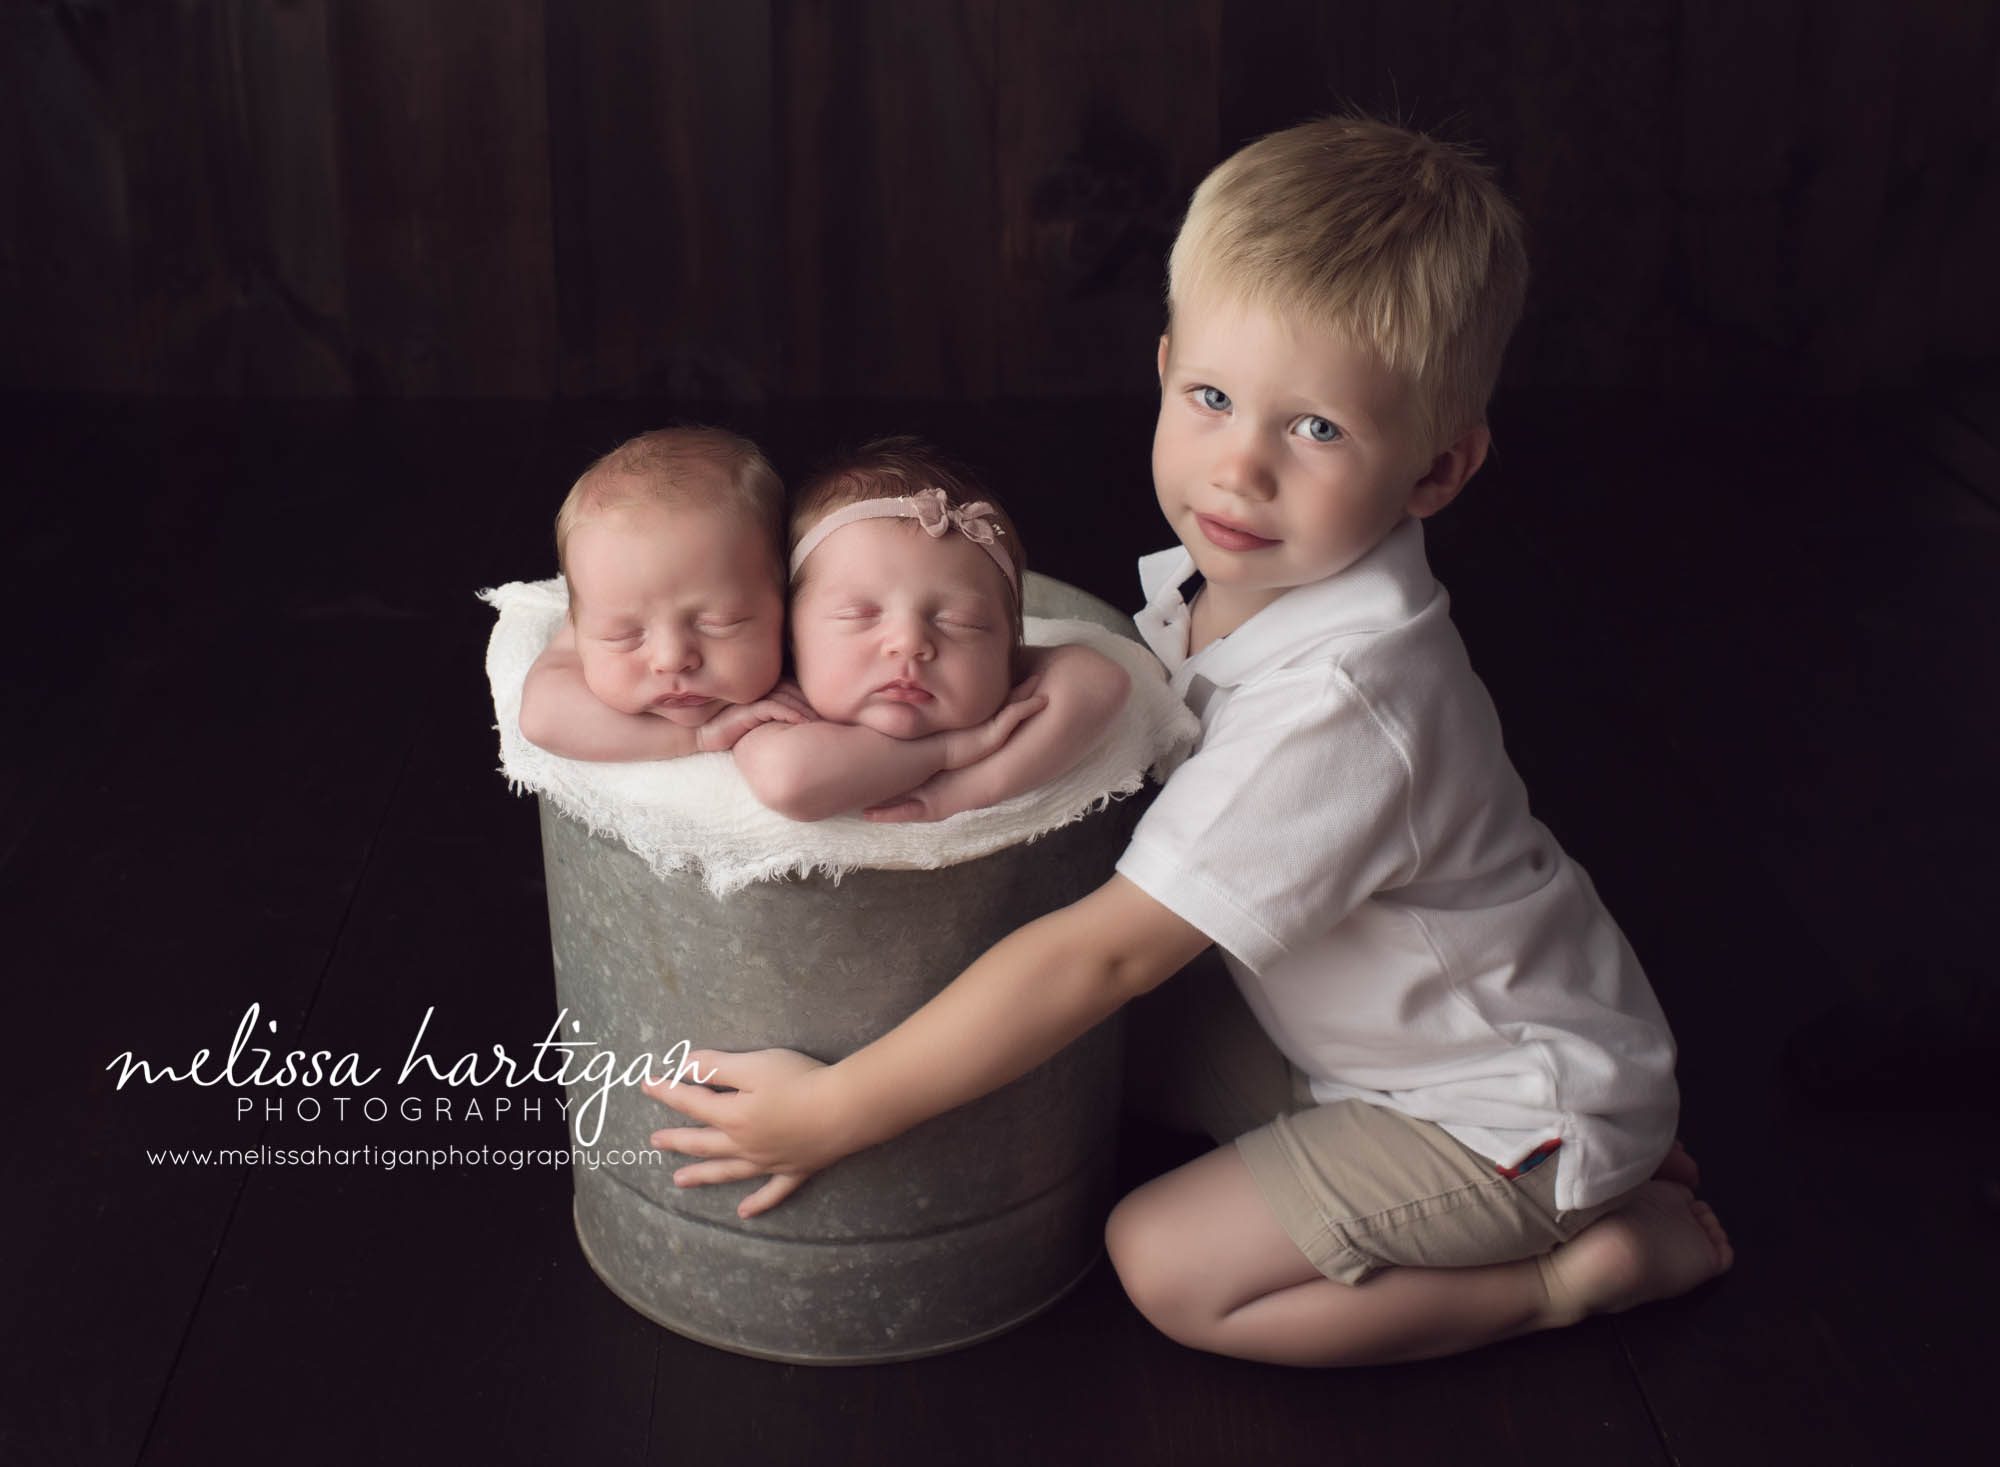 Melissa Hartigan Photography Connecticut Newborn twin Photographer Coventry Ct Middlefield CT baby Fairfield county Newborn and maternity CT photographer Newborn twin photographer baby twins sleeping in metal bucket with big brother holding bucket